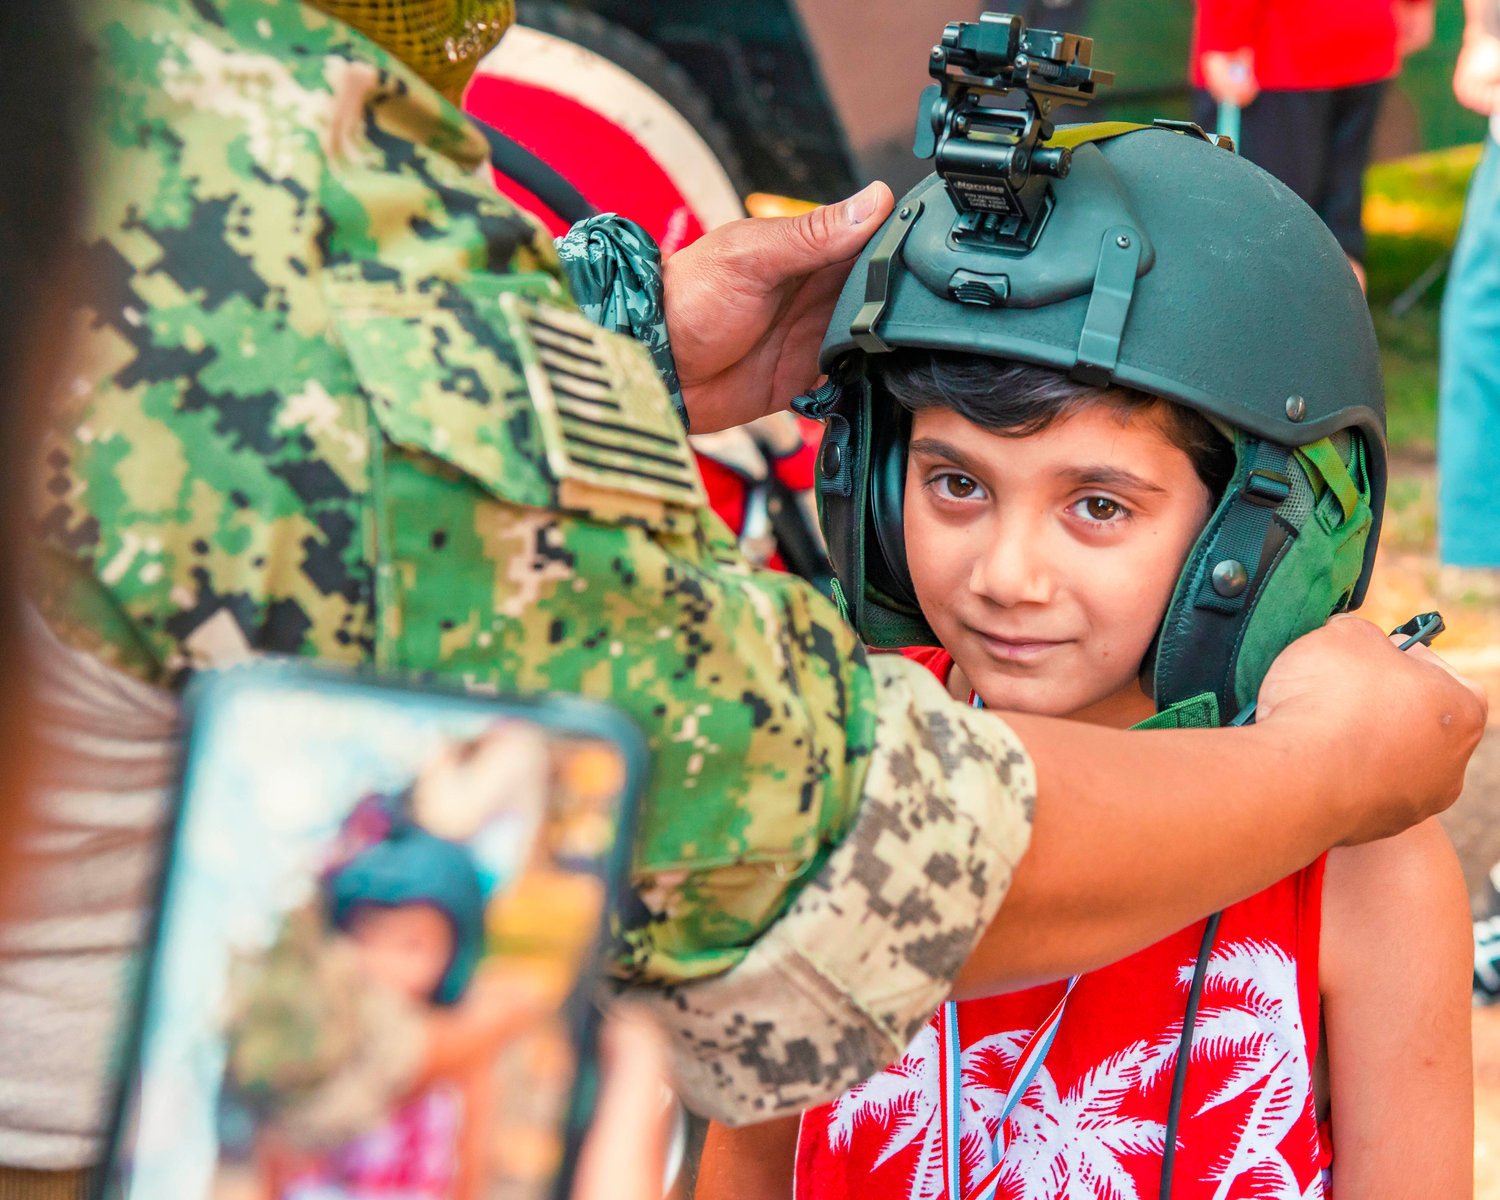 Seth Alldis smiles as he tries on a helmet worn by military during Summerfest at Borst Park for Fourth of July Sunday afternoon in Centralia.